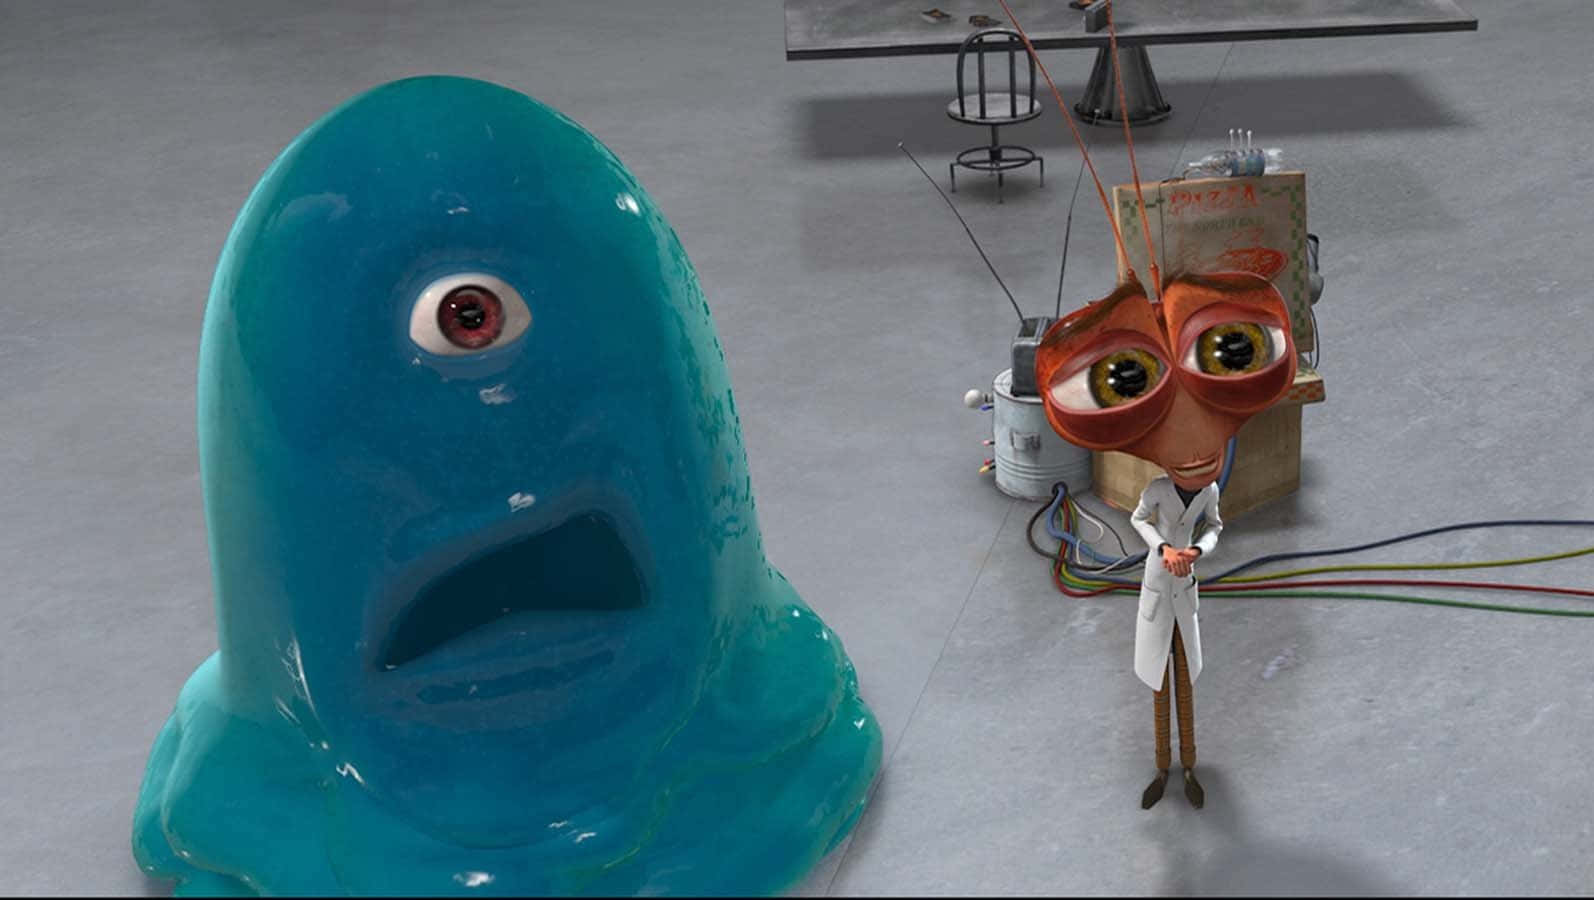 Laughing Bob and Cockroach from Monsters Vs Aliens Animated Movie. Wallpaper